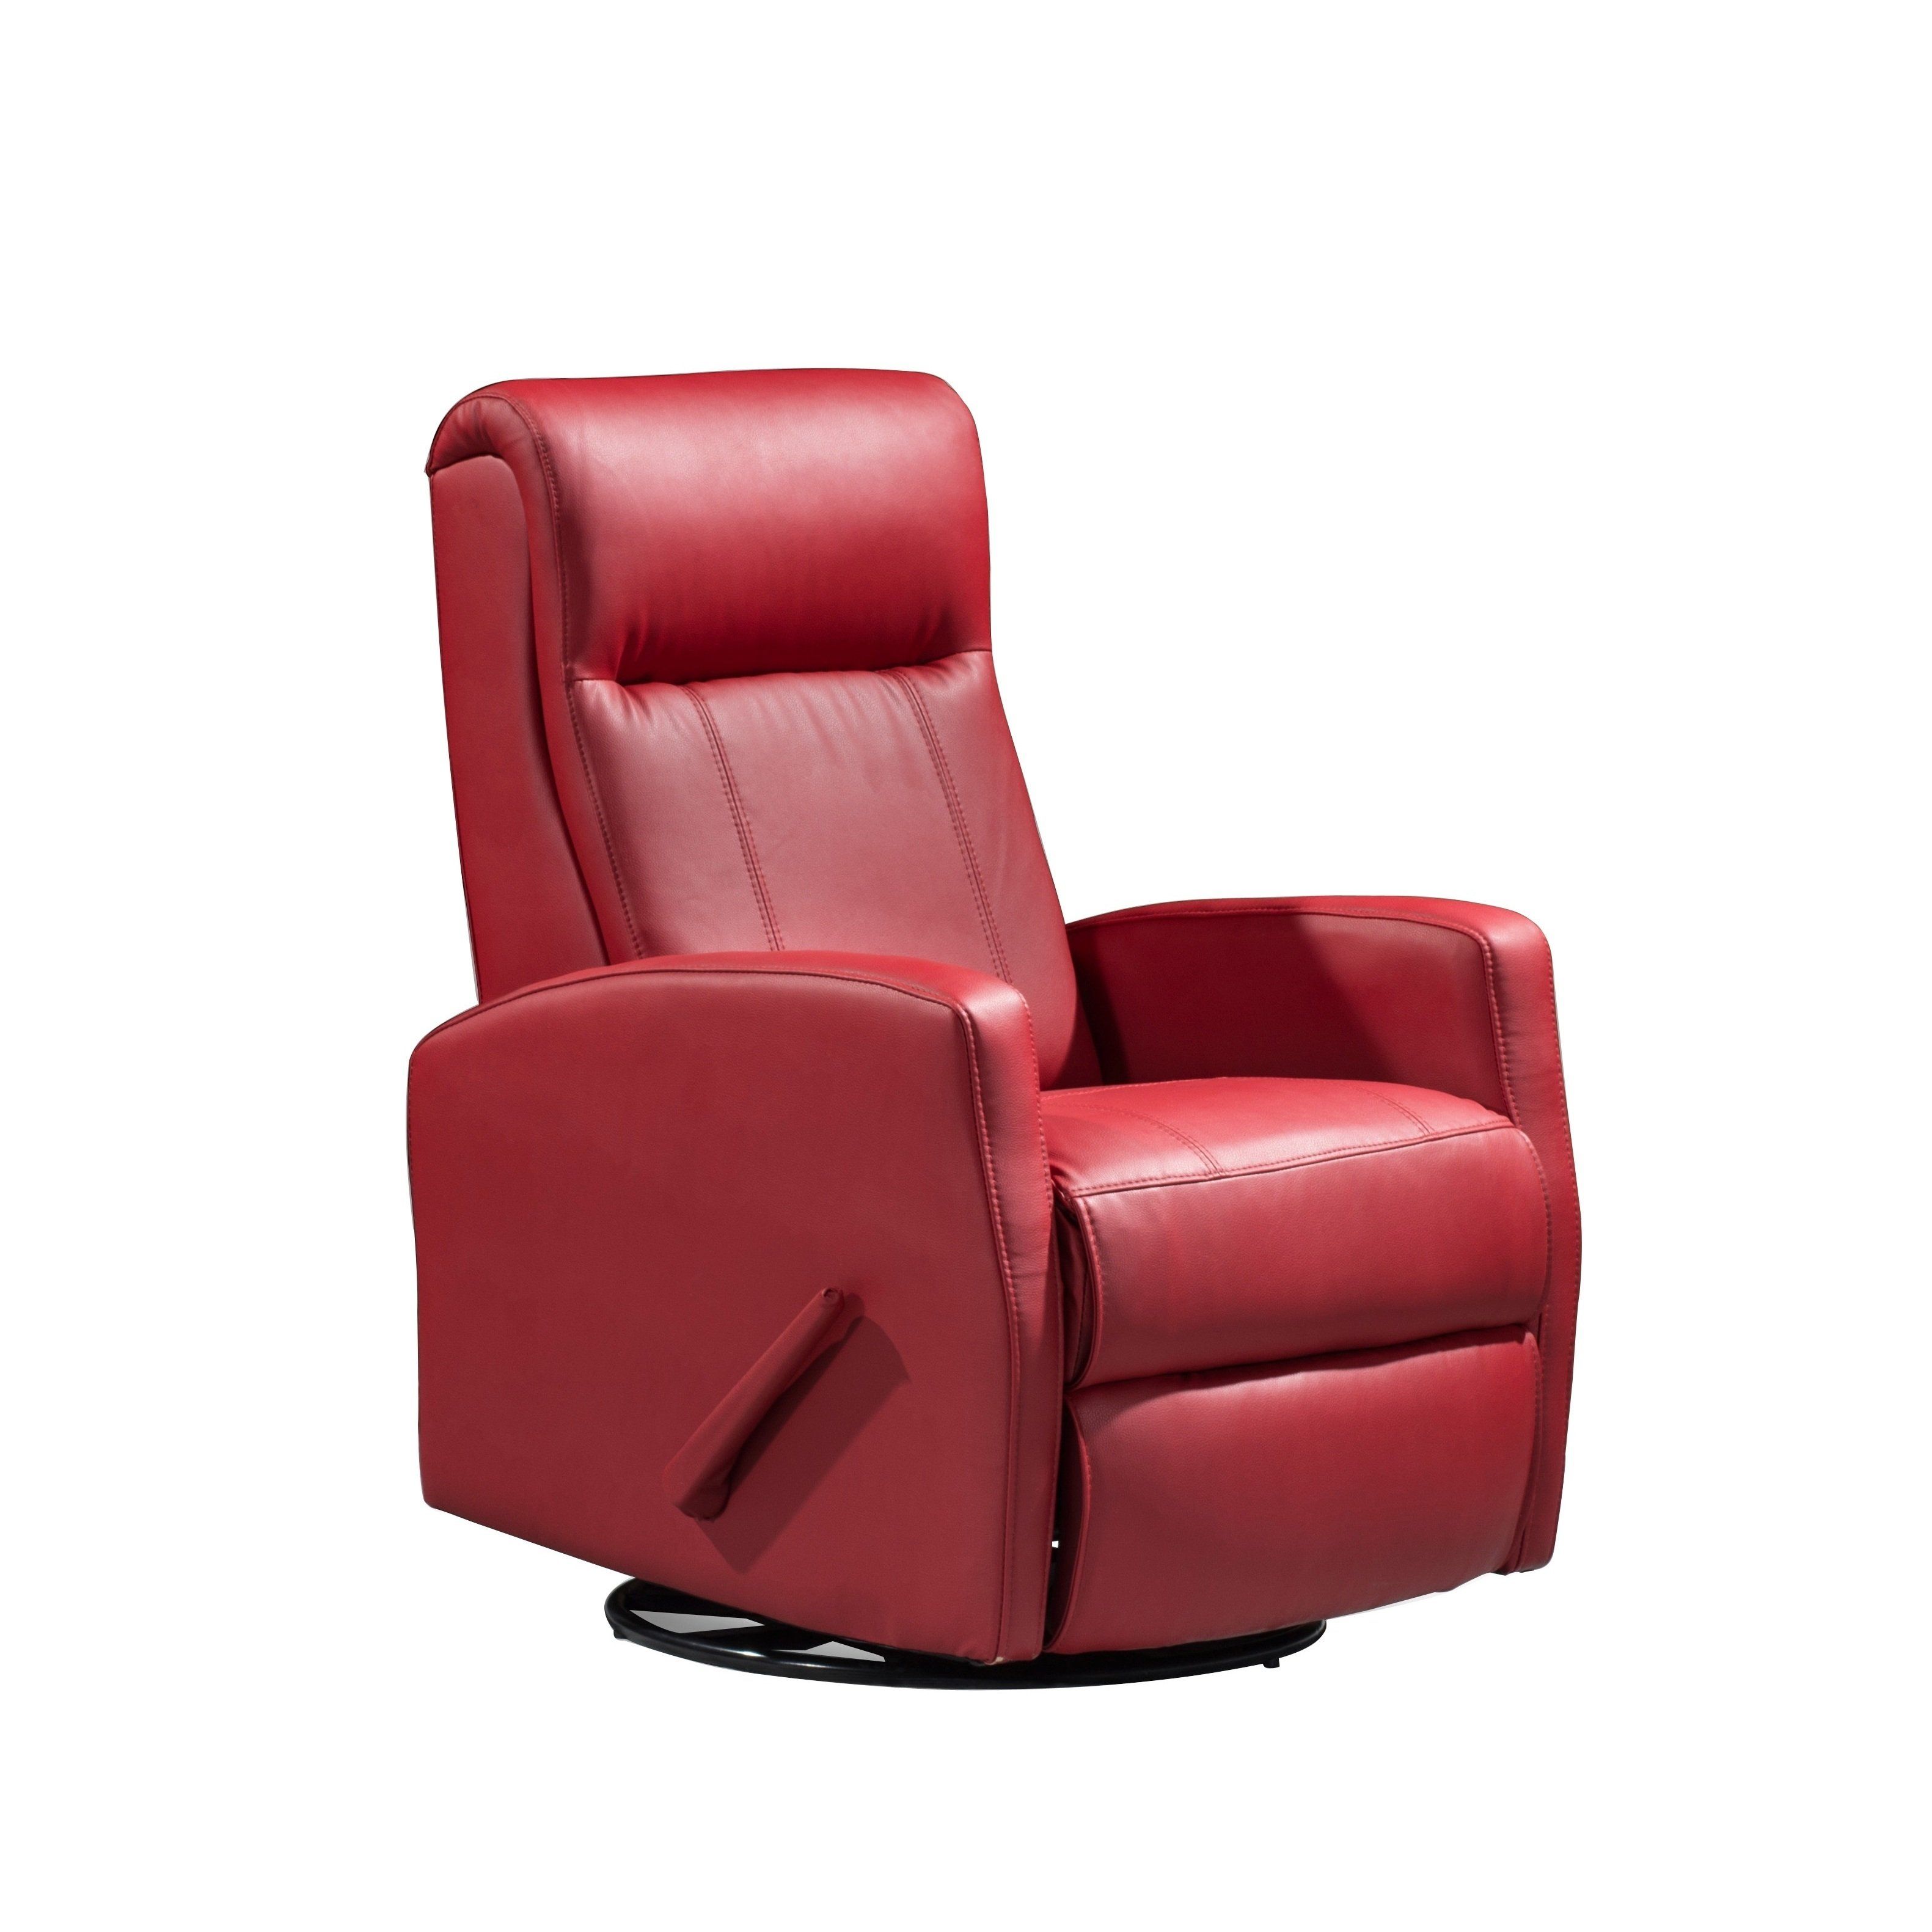 Easy Living Finland Swivel Glider Recliner Throughout Gannon Linen Power Swivel Recliners (View 18 of 20)